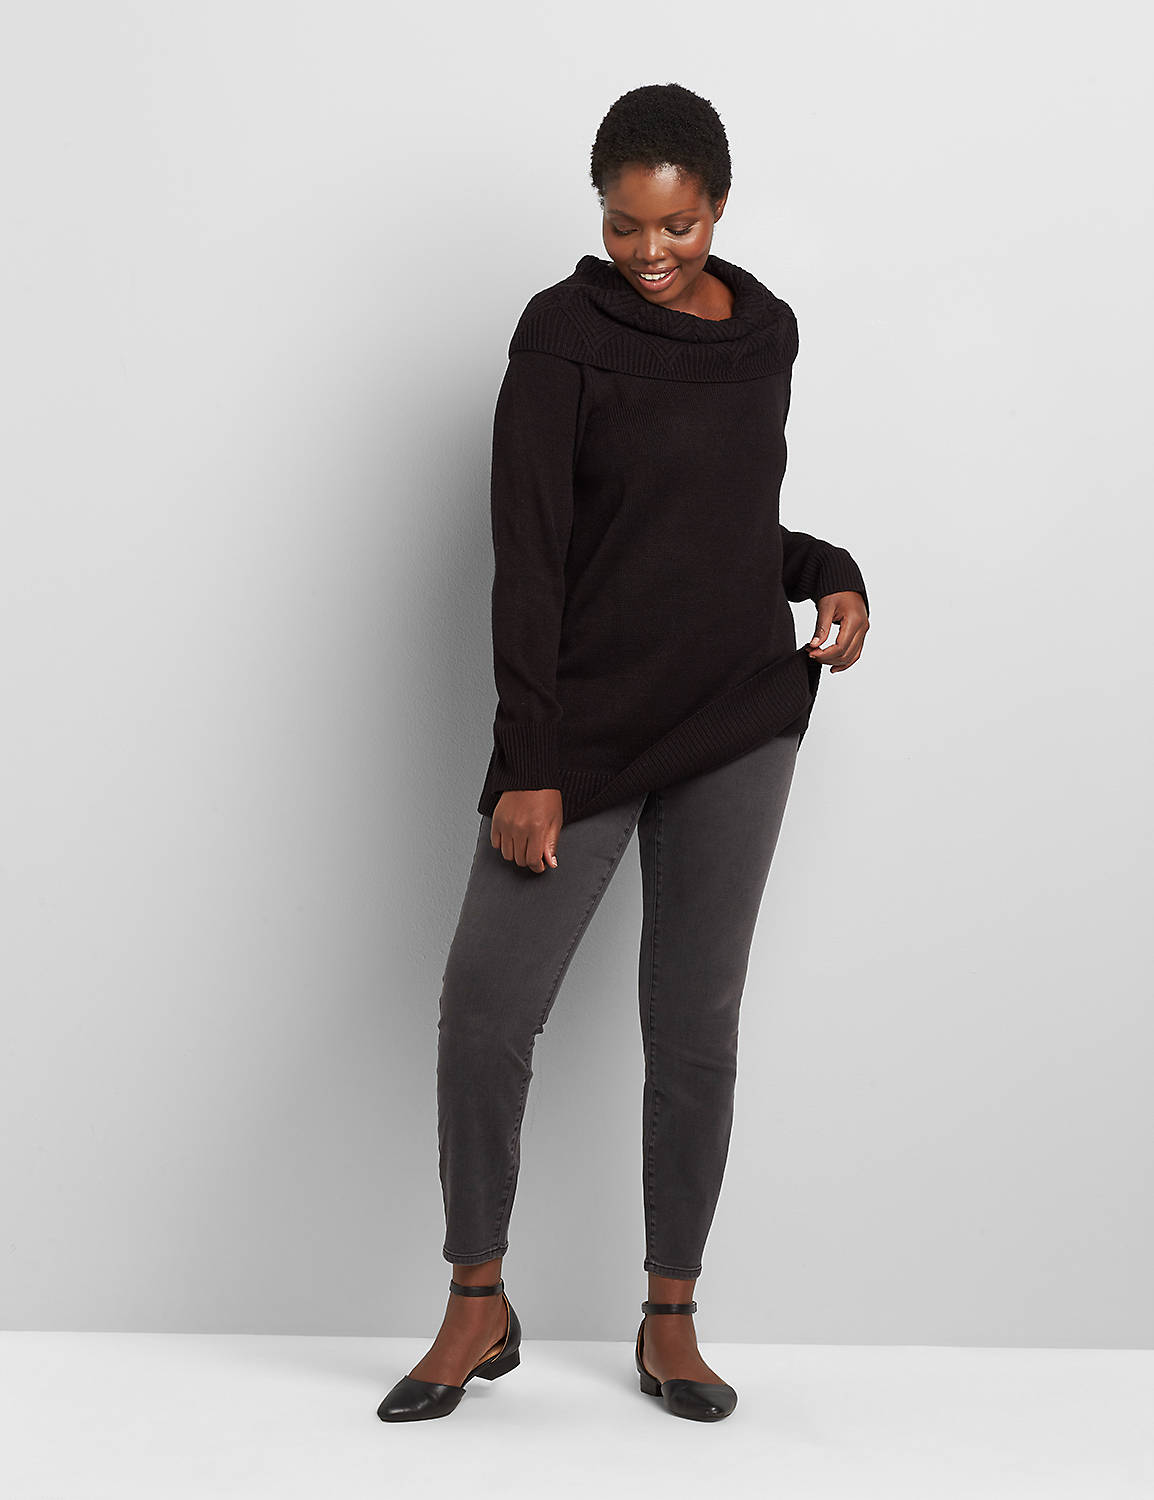 OUTLET LONG SLEEVE COWL POINTELLE TUNIC SWEATER 1113638:Pitch Black LB 1000322:14/16 Product Image 3